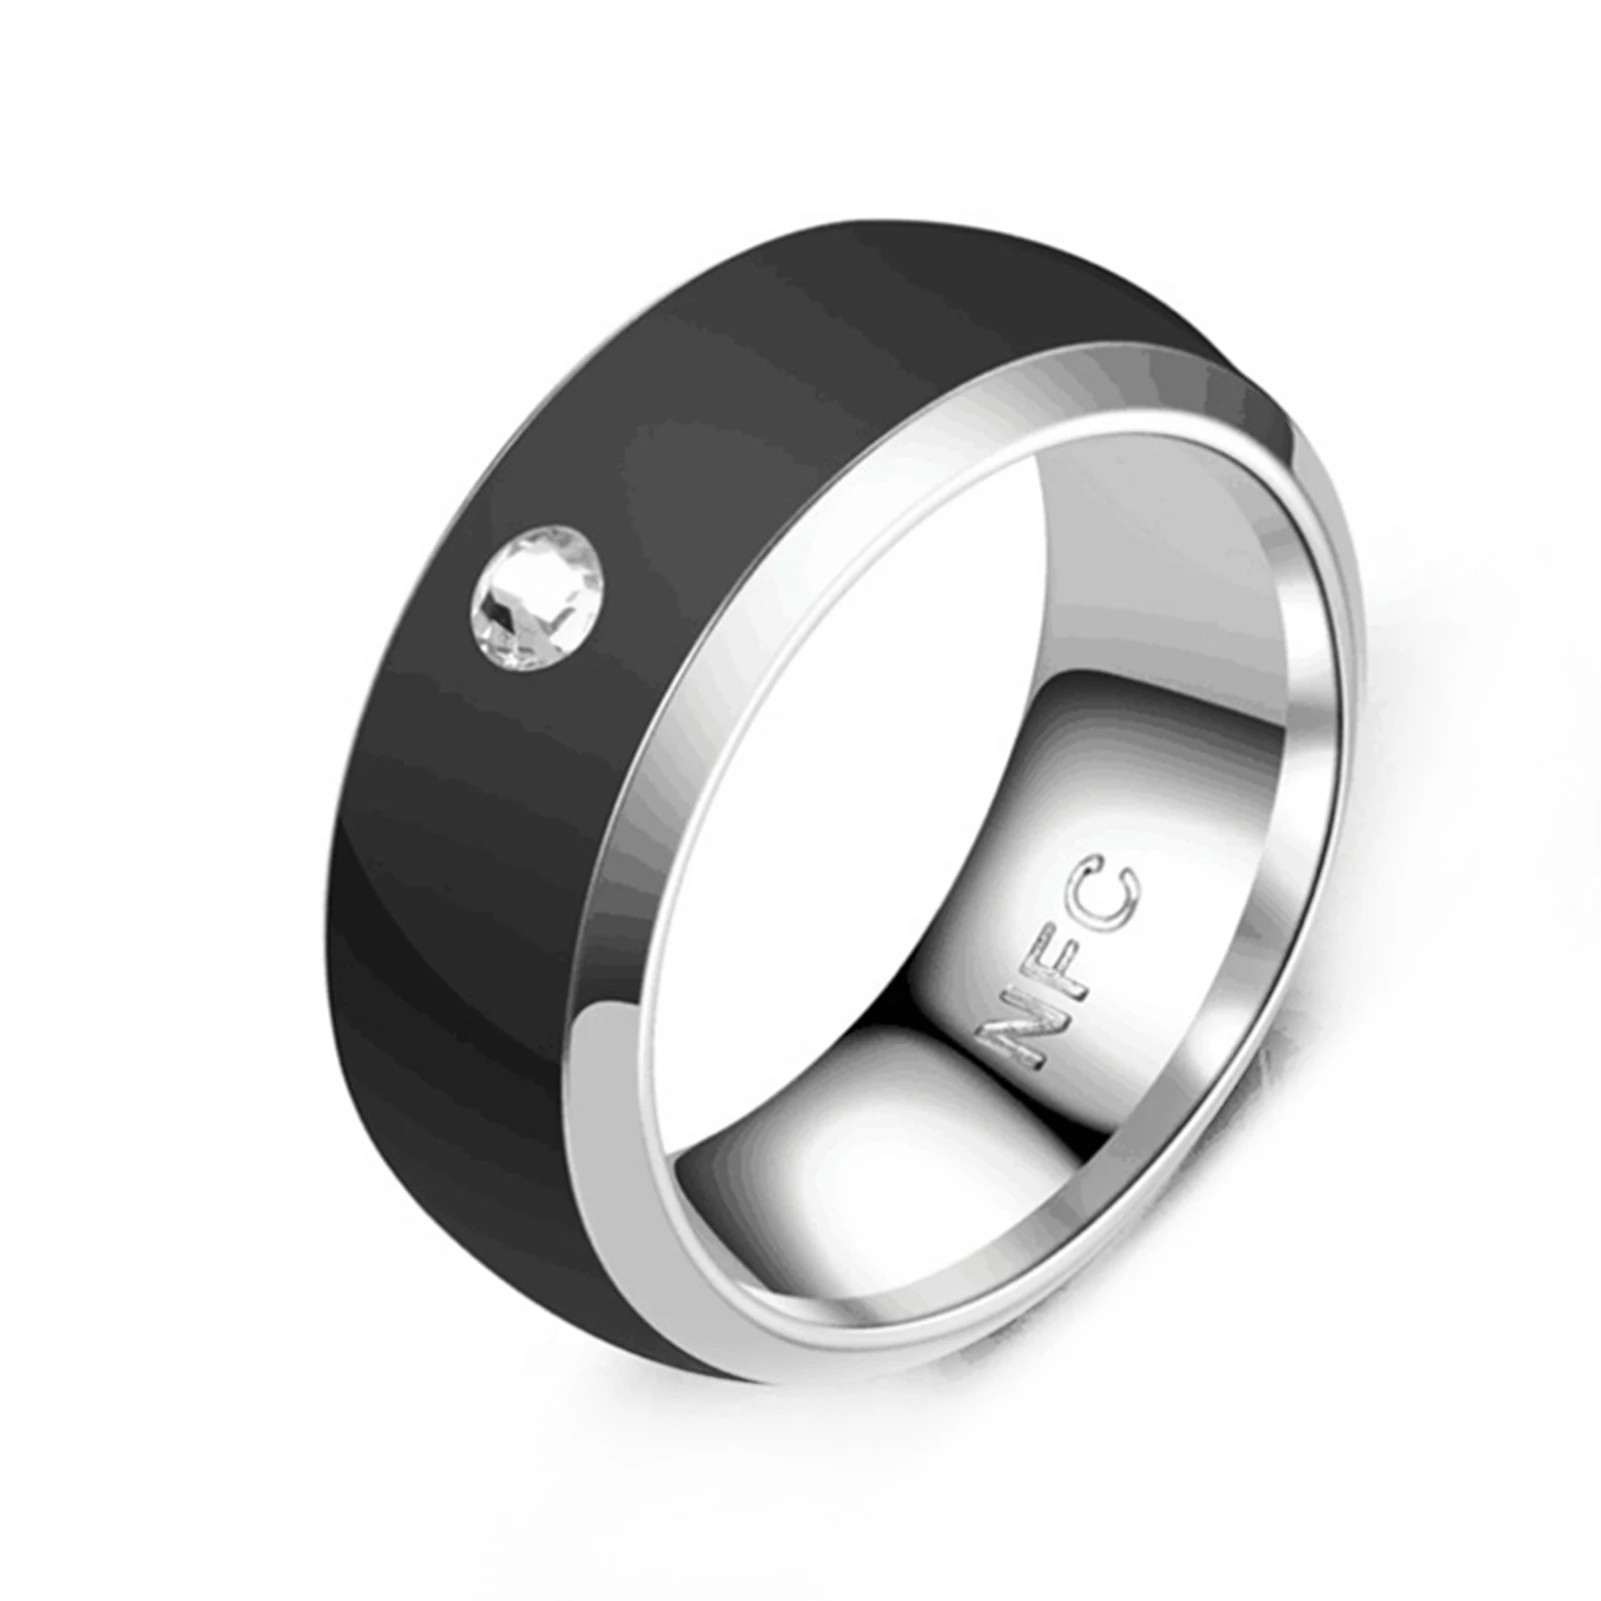 Smart Ring Wearable Technology Waterproof Unisex NFC Phone Smart Accessories for Couples 6 13 XIN Shipping